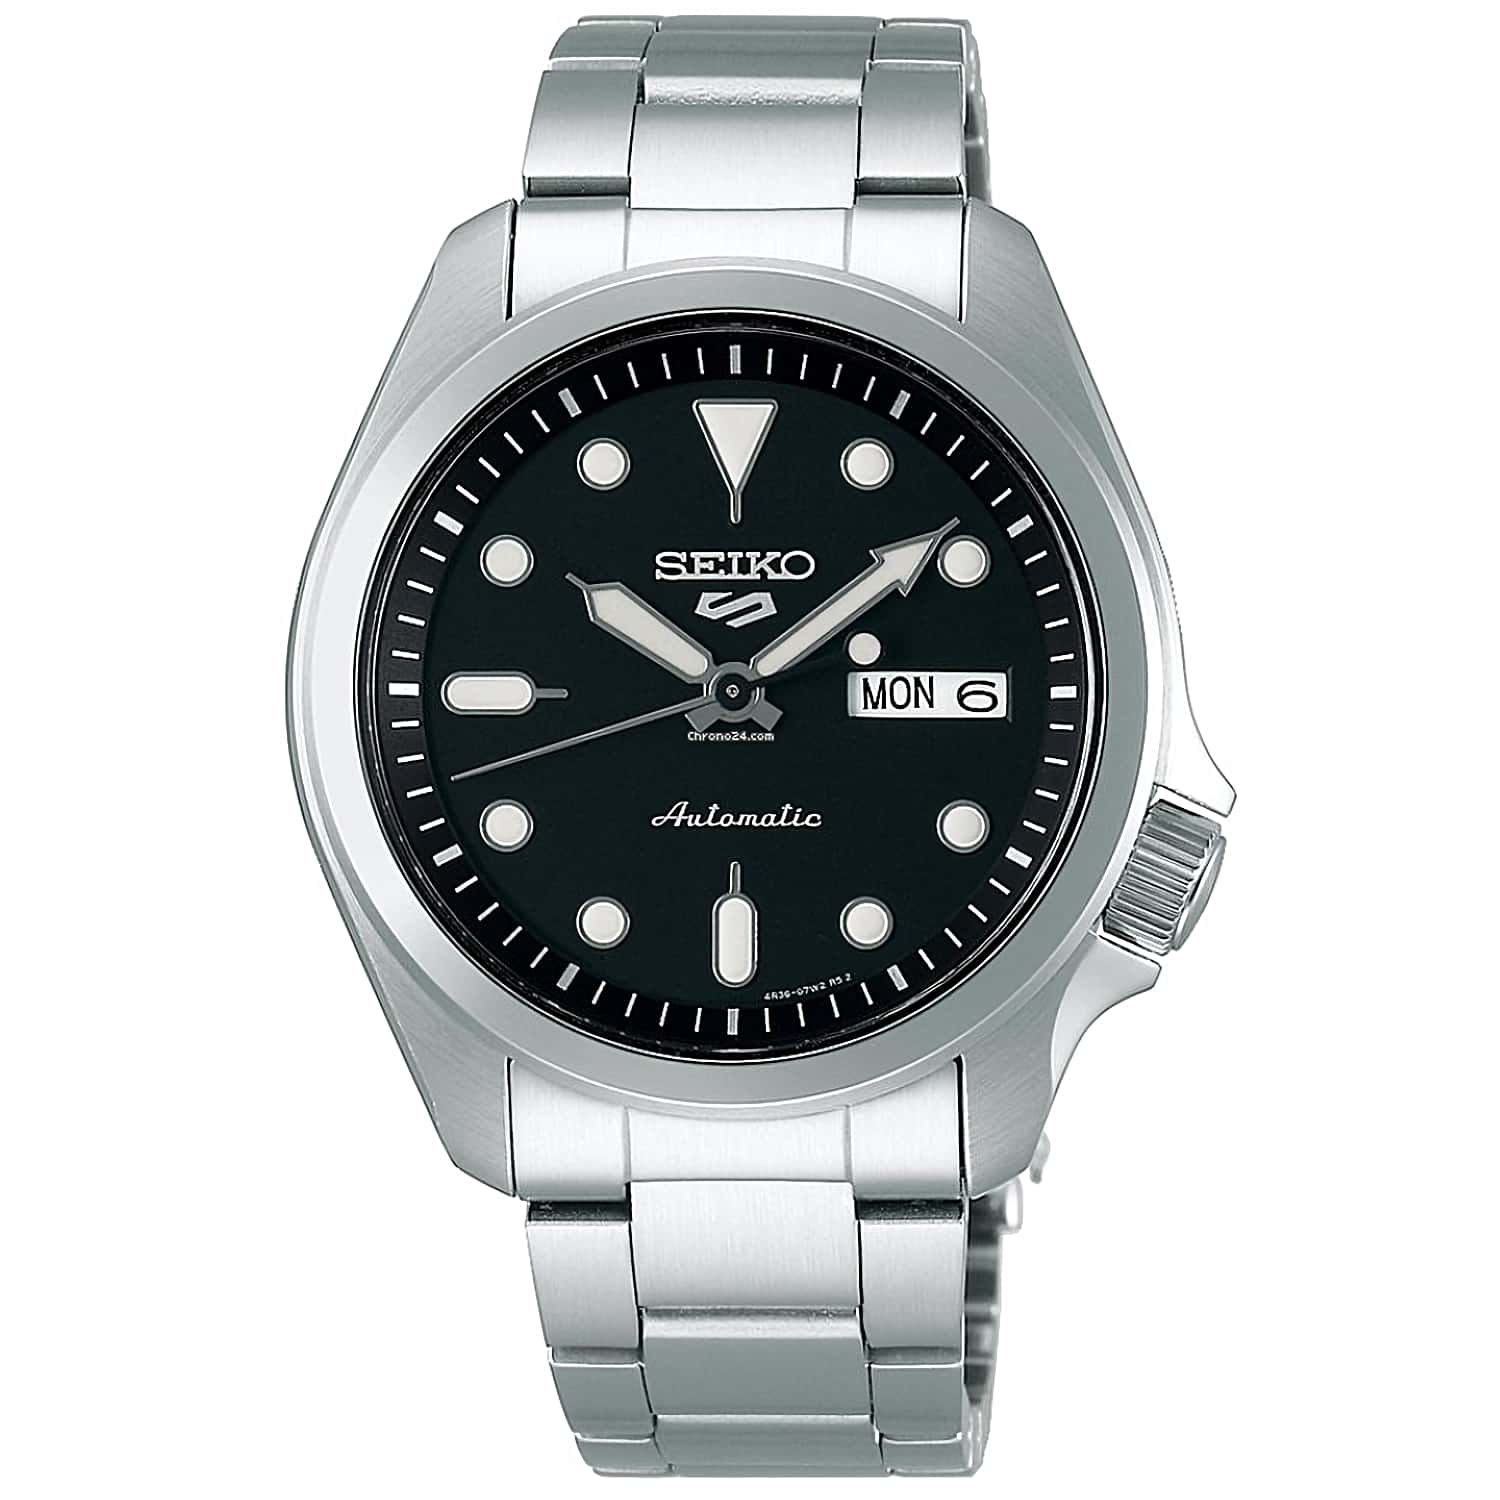 SRPE55K1 SEIKO 5 Automatic Sports Watch. New watches in the Seiko 5 Sports Collection Oxipay is simply the easier way to pay - use Oxipay and well spread your payment up to a maximum of $1500 over either 4 or 8 easy instalments. No interest. Ever! 3 Month